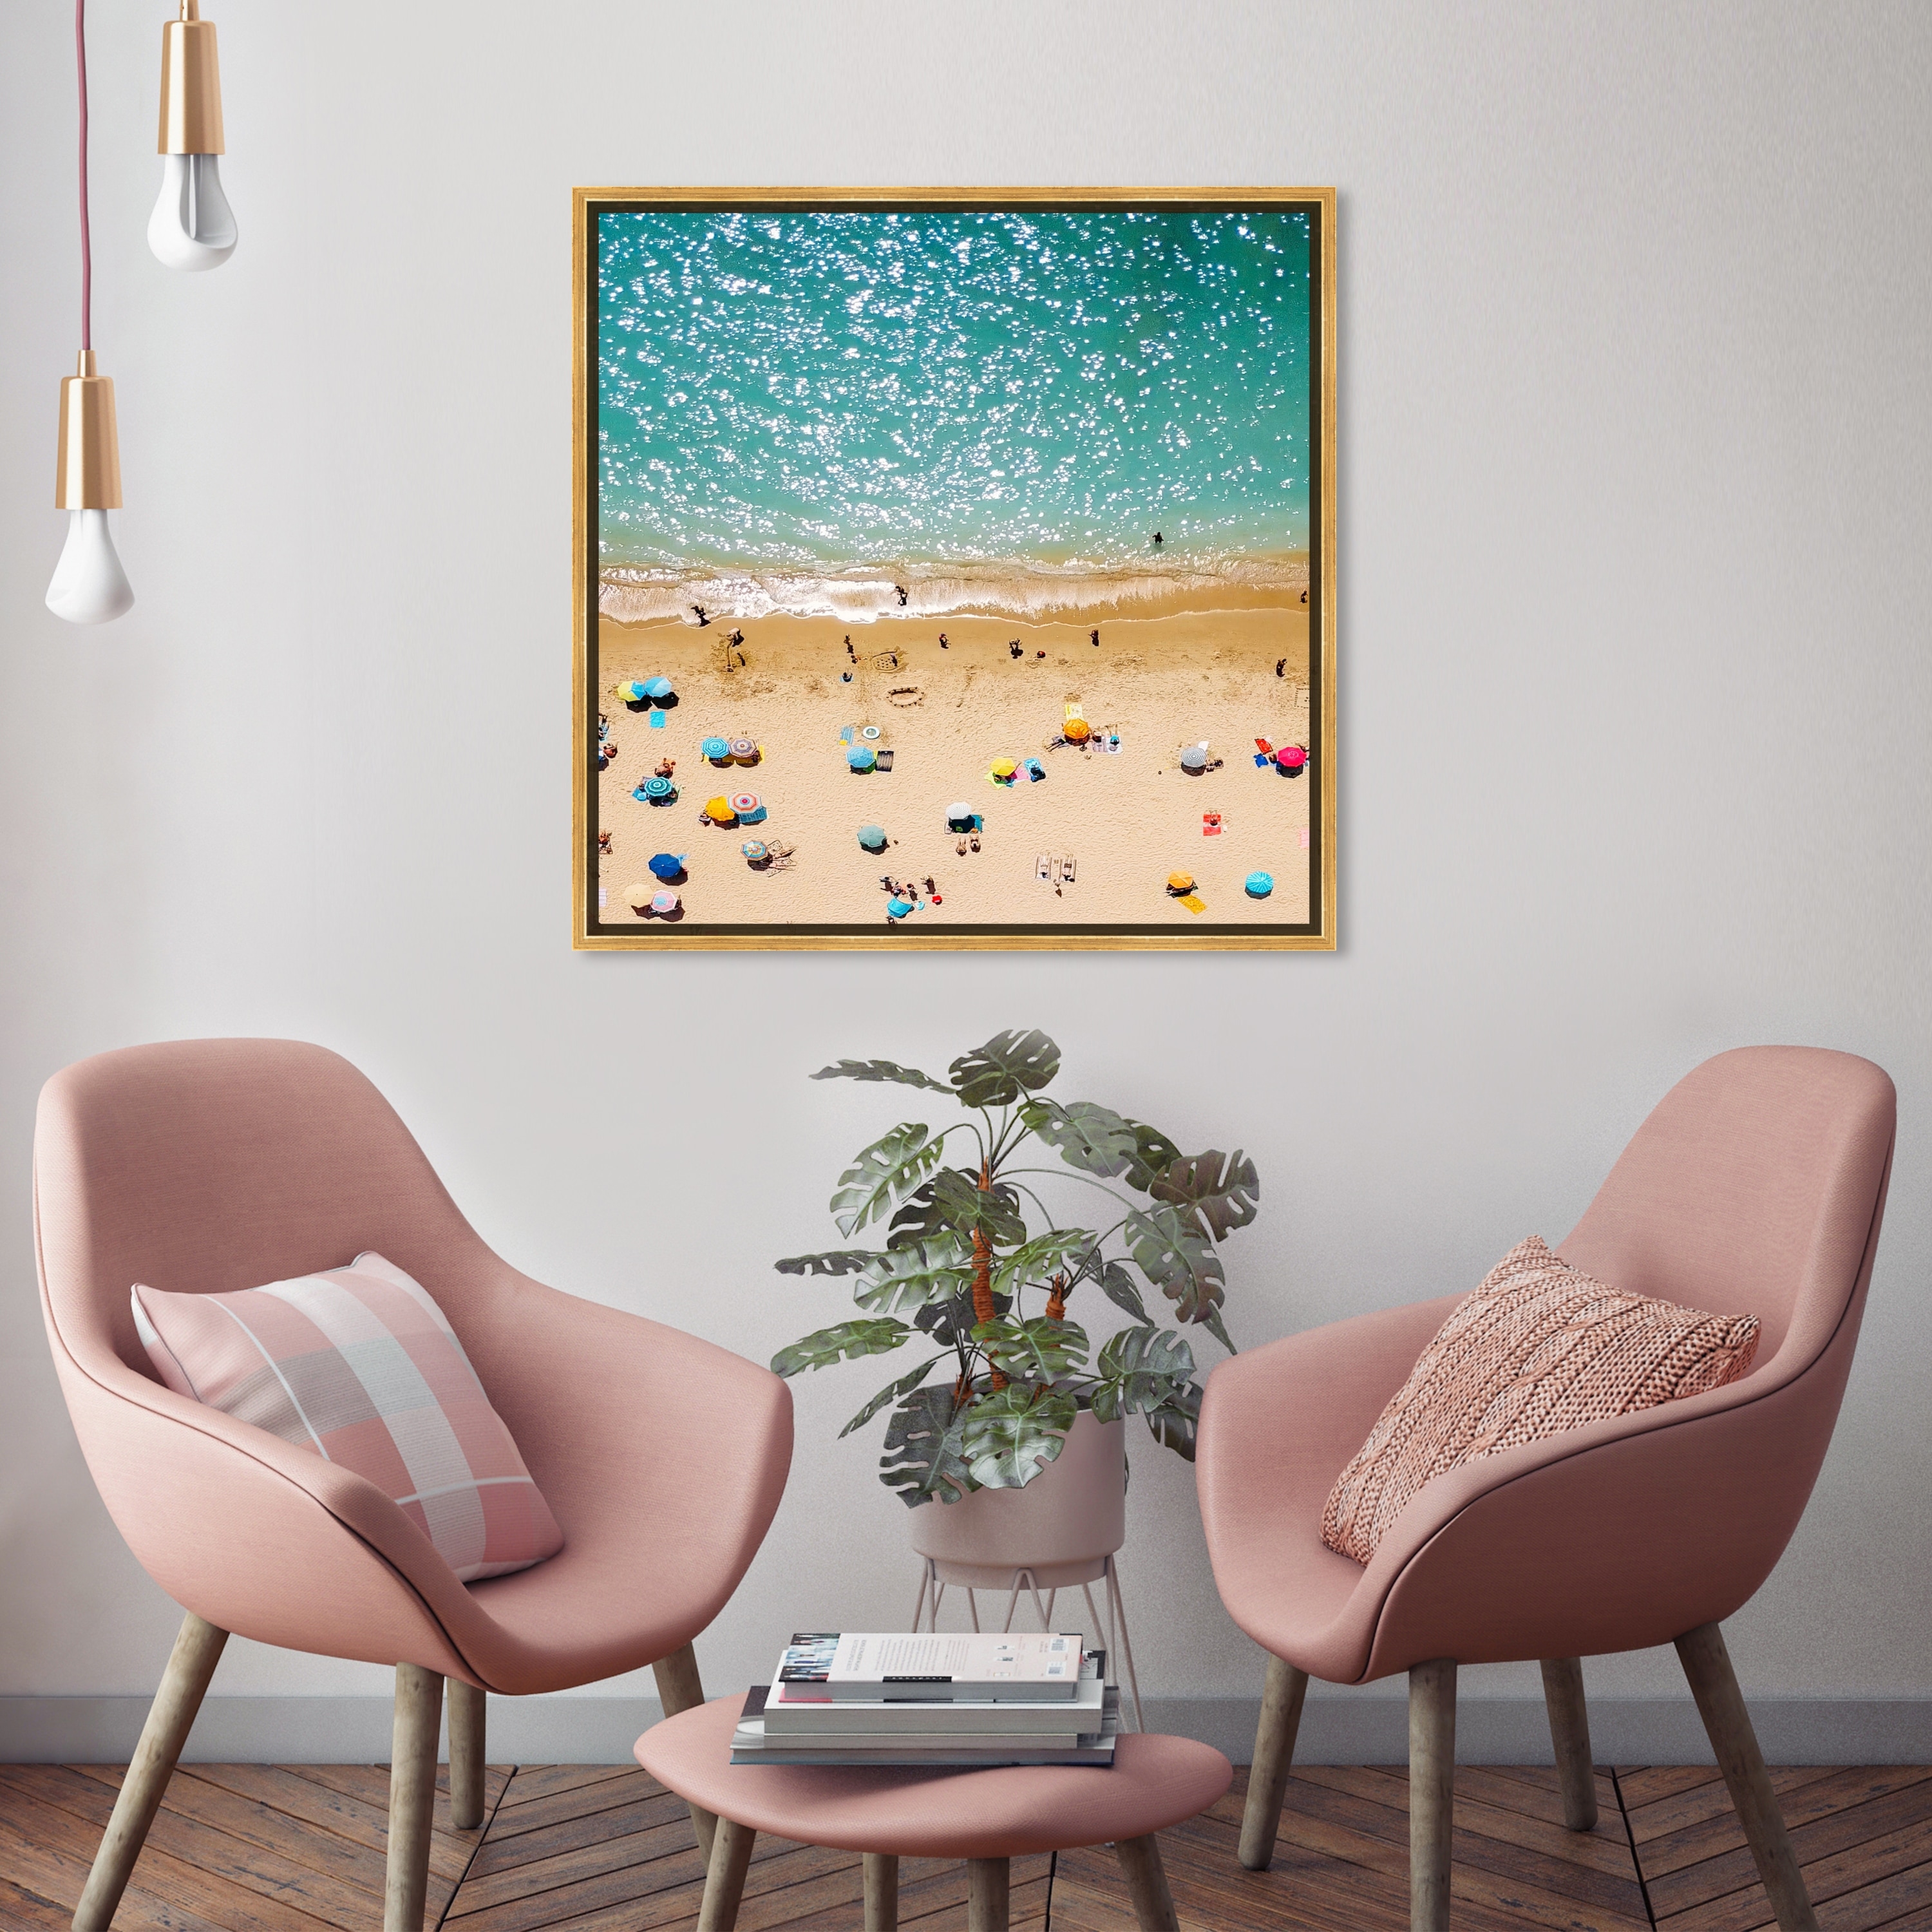  Oliver Gal 'A Day At the Beach' Canvas Art, 36x24 :  Everything Else